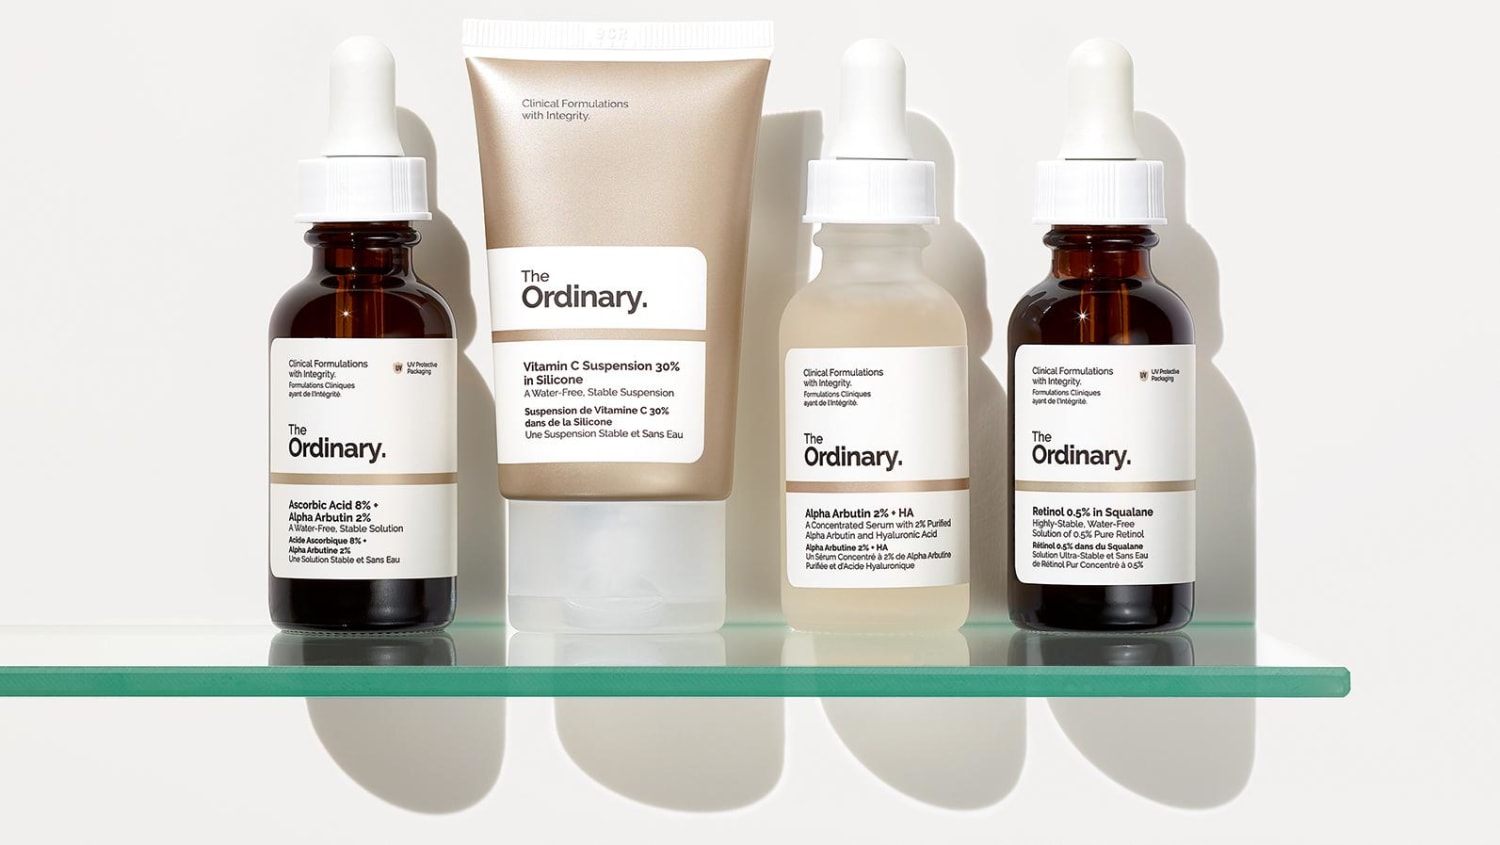 How The Ordinary perfected the art of medical minimalism